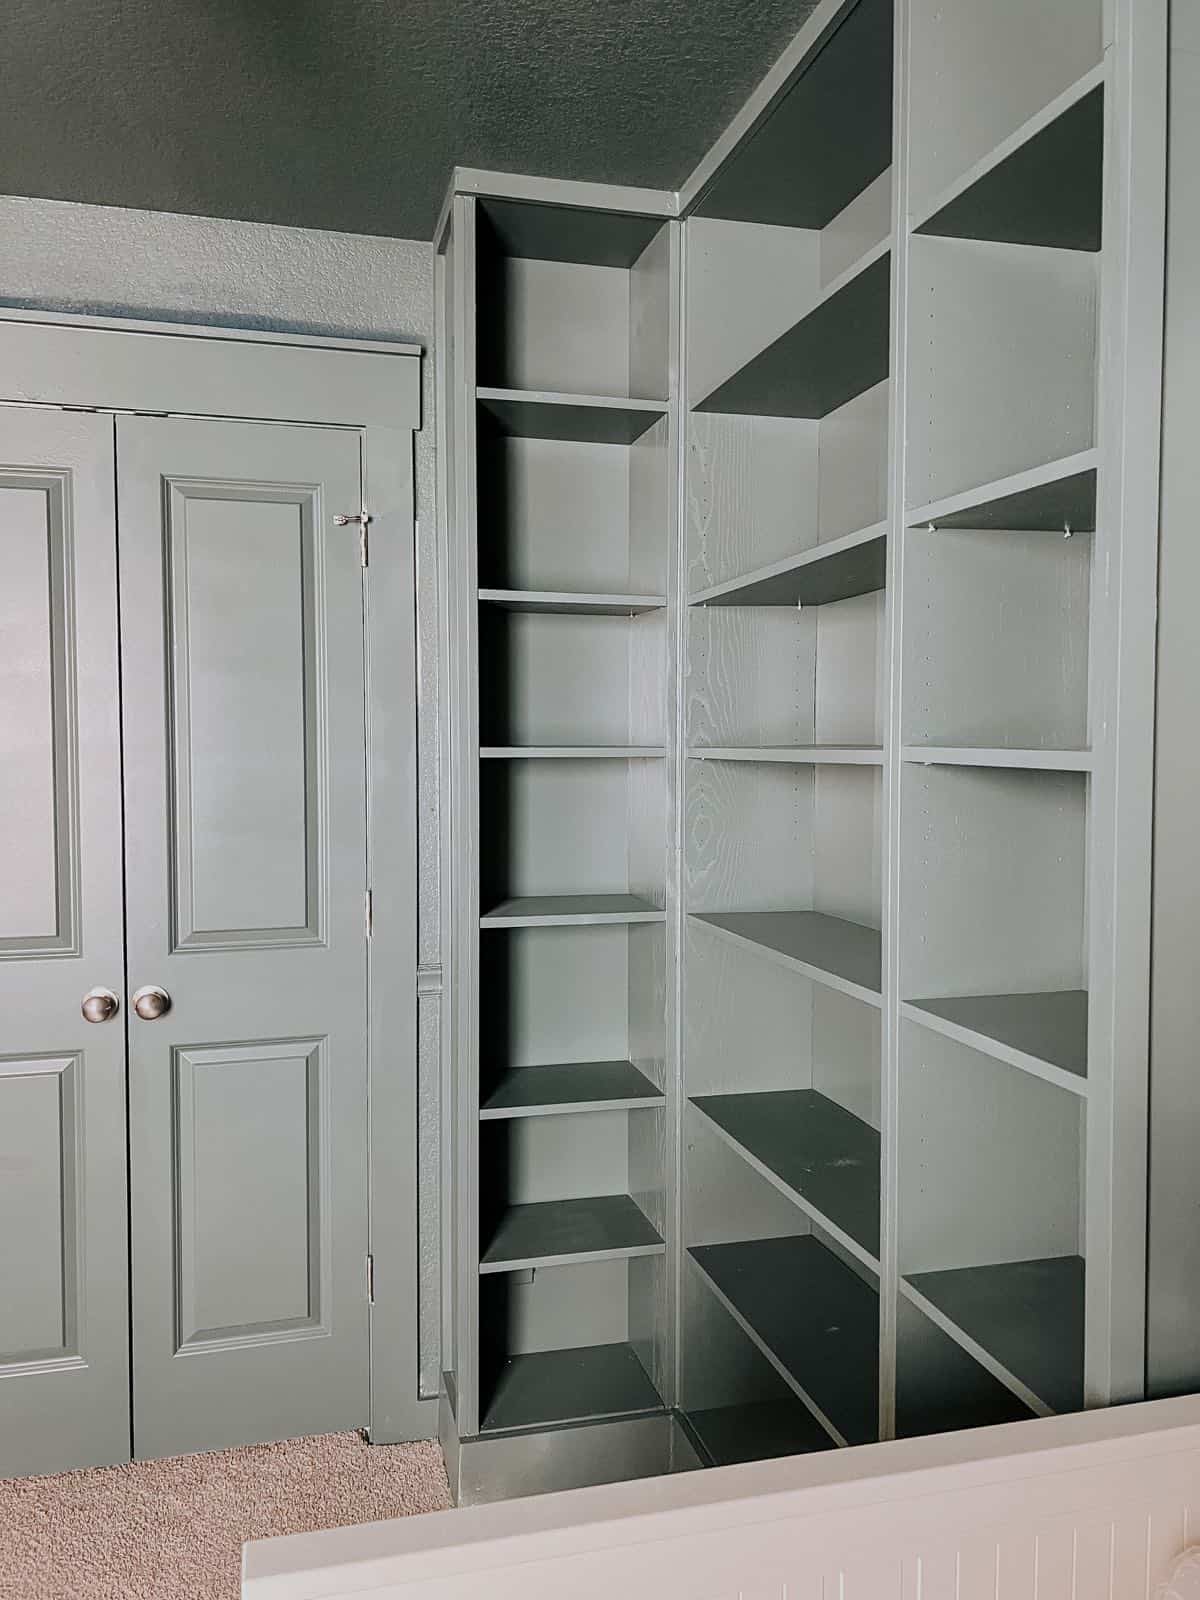 Grant’s Built-In Billy Bookcases